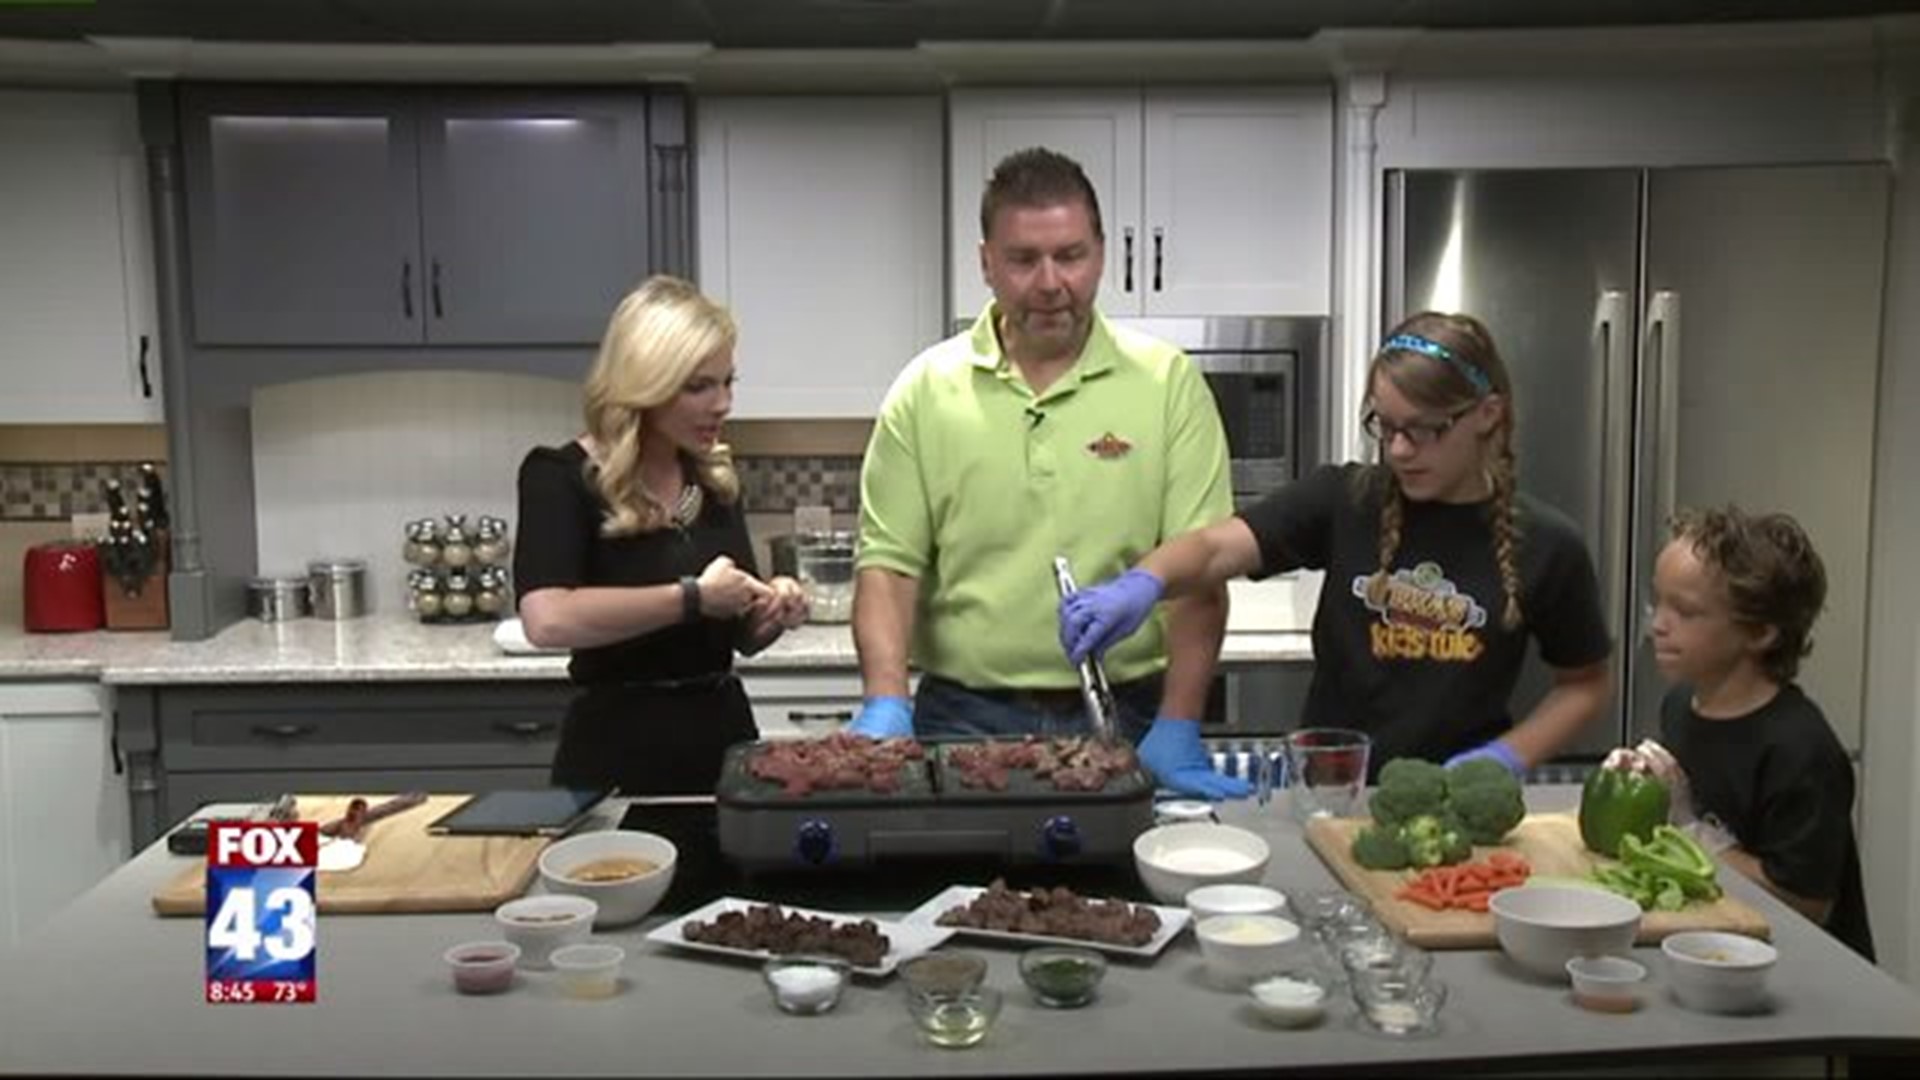 Get your kids in the kitchen with this fun and educational Texas Roadhouse recipe